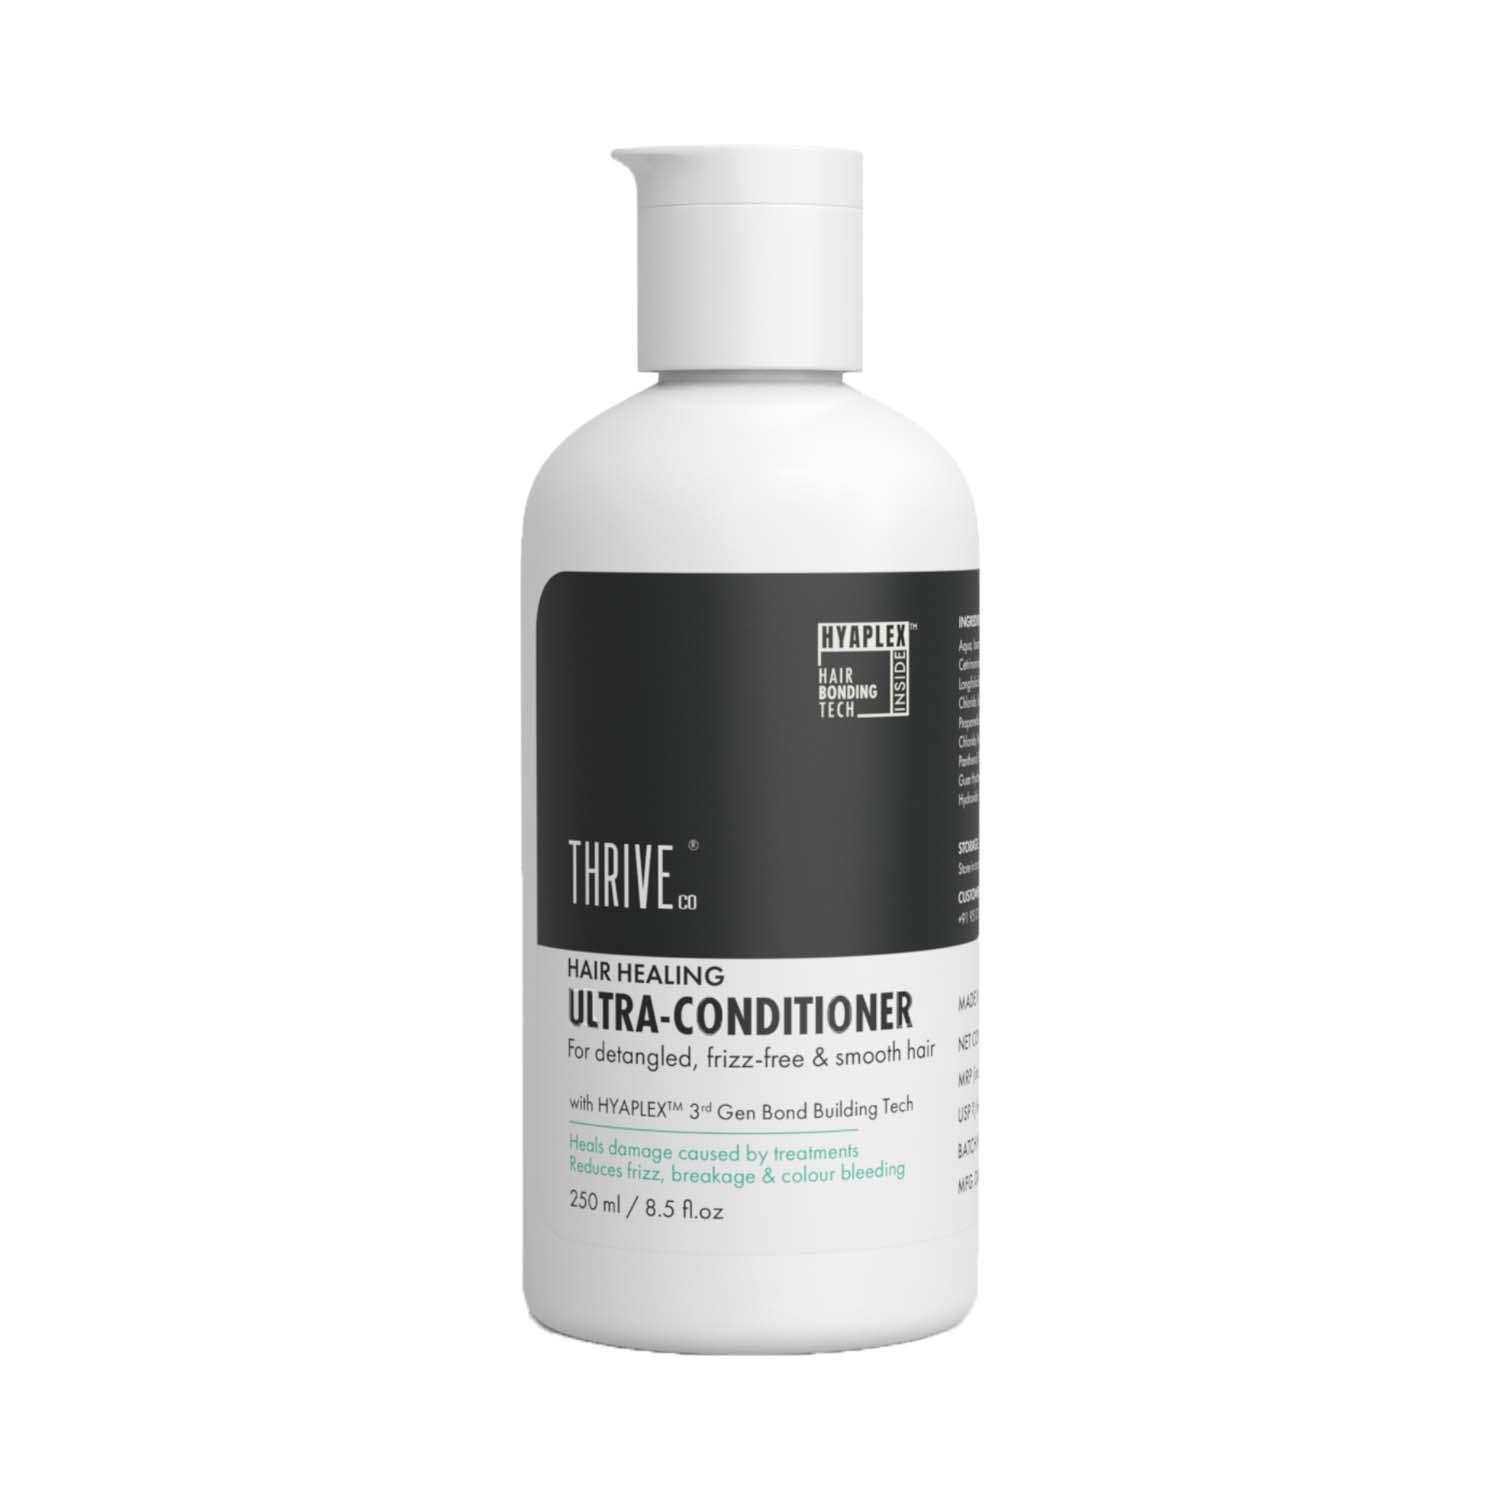 Thriveco | Thriveco Hair Healing Conditioner (250 ml)